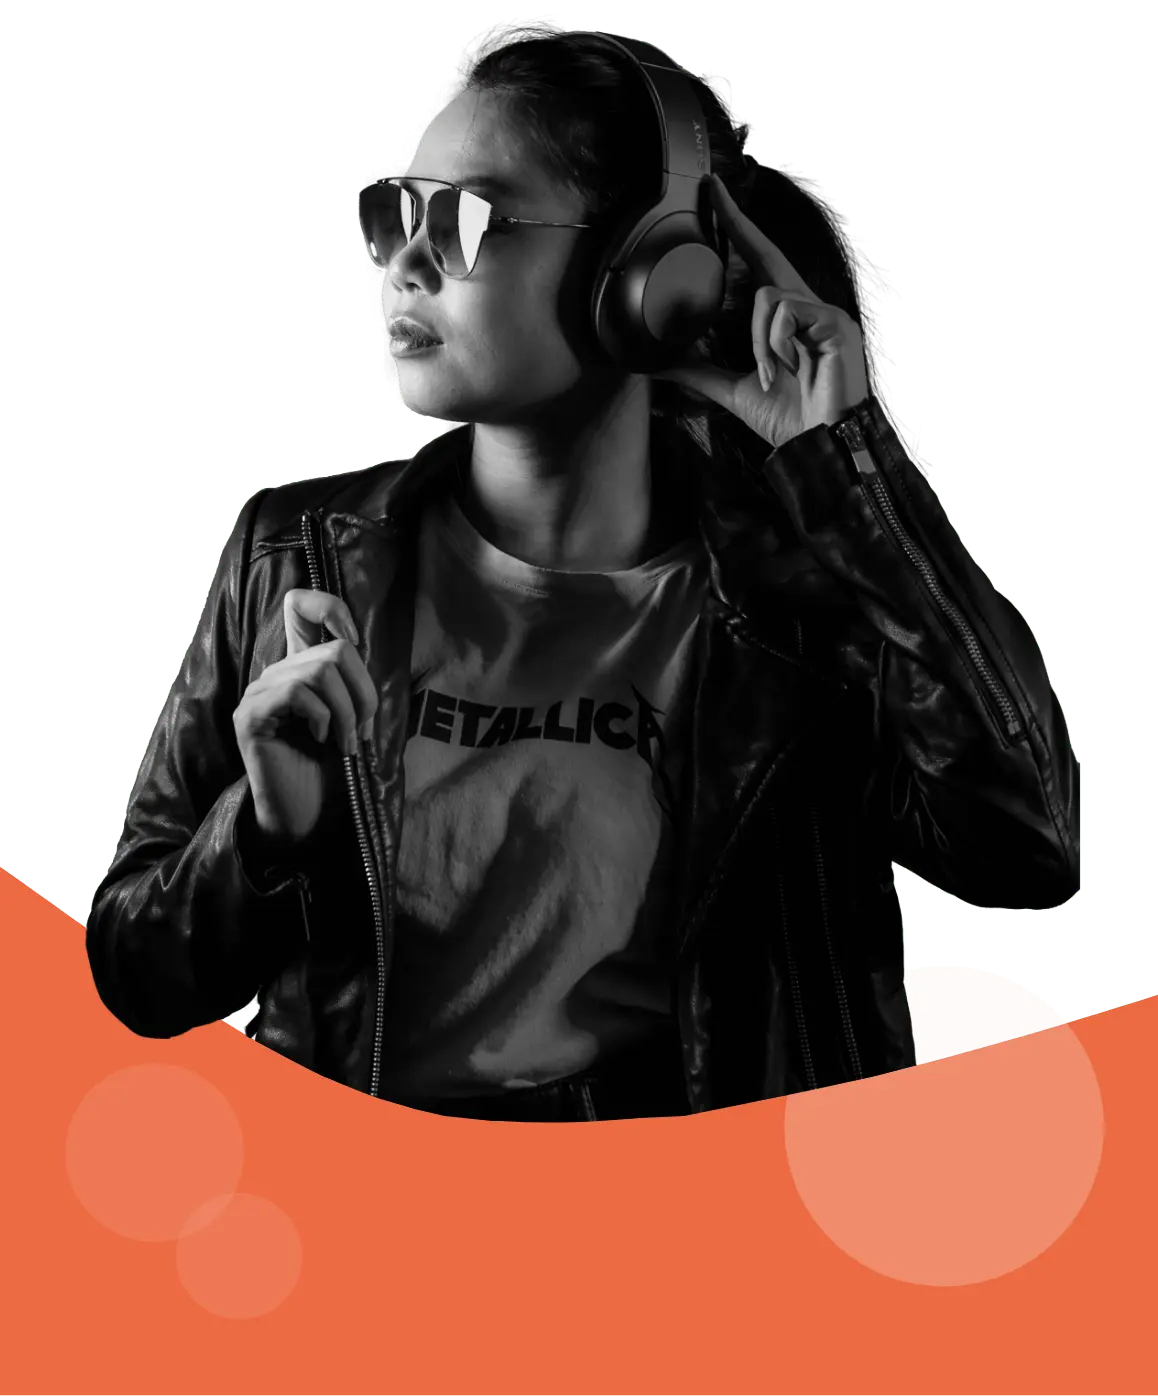 In black and white, a black haired woman in a leather jacket, sunglasses and wearing large headphones, facing her left. She's holding one of the ears of her headphones with one hand and the lapel of her jacket with the other. Her shirt has the logo of metal band "Metallica". Her lower body is partially obstructed by a curved shape in Magroove's orange color.